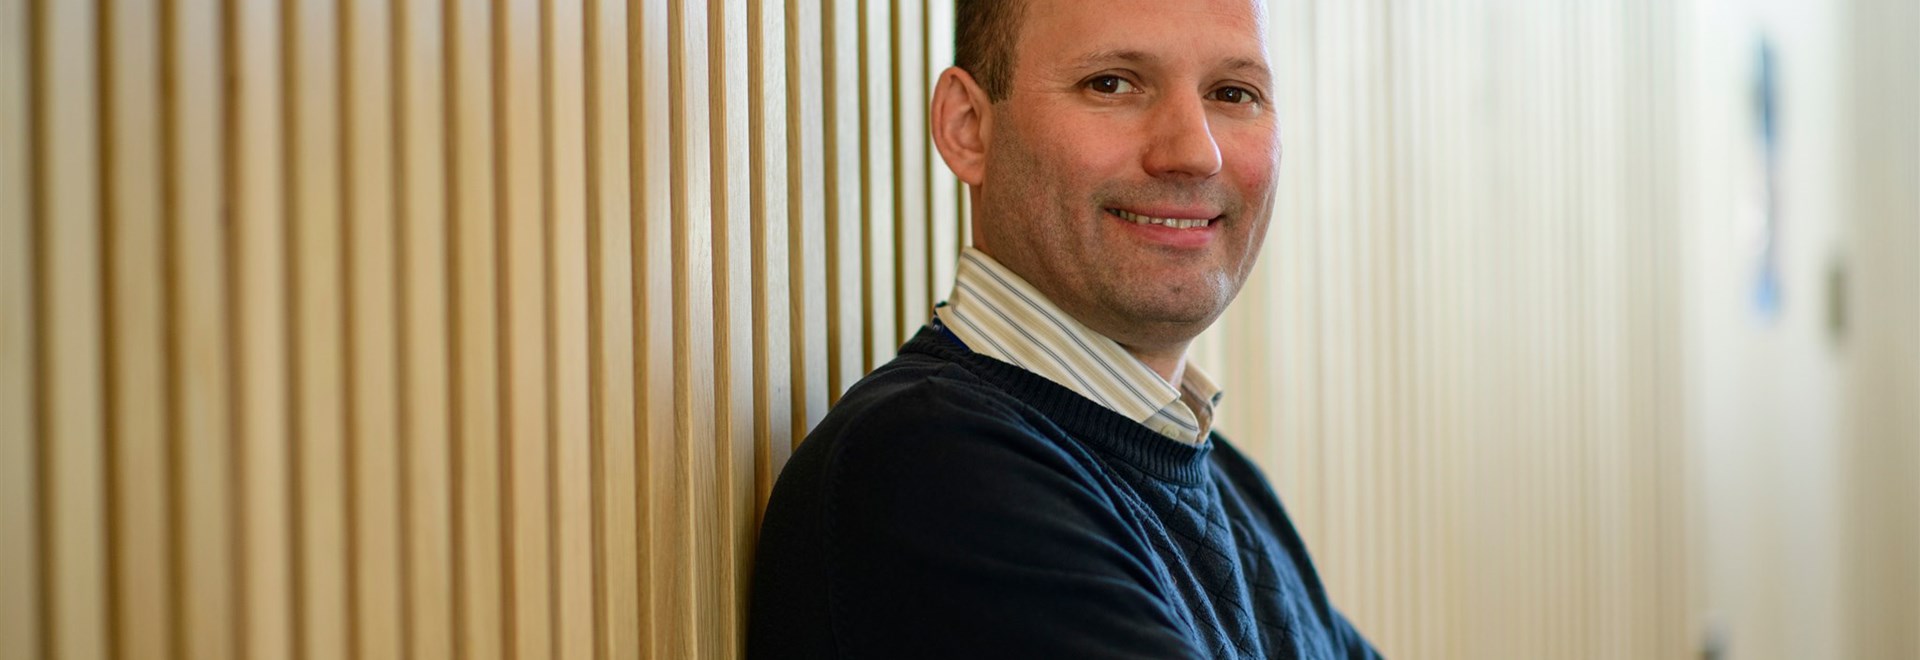 LCL brings in architectural expertise with Project Manager Stéphane Mascart